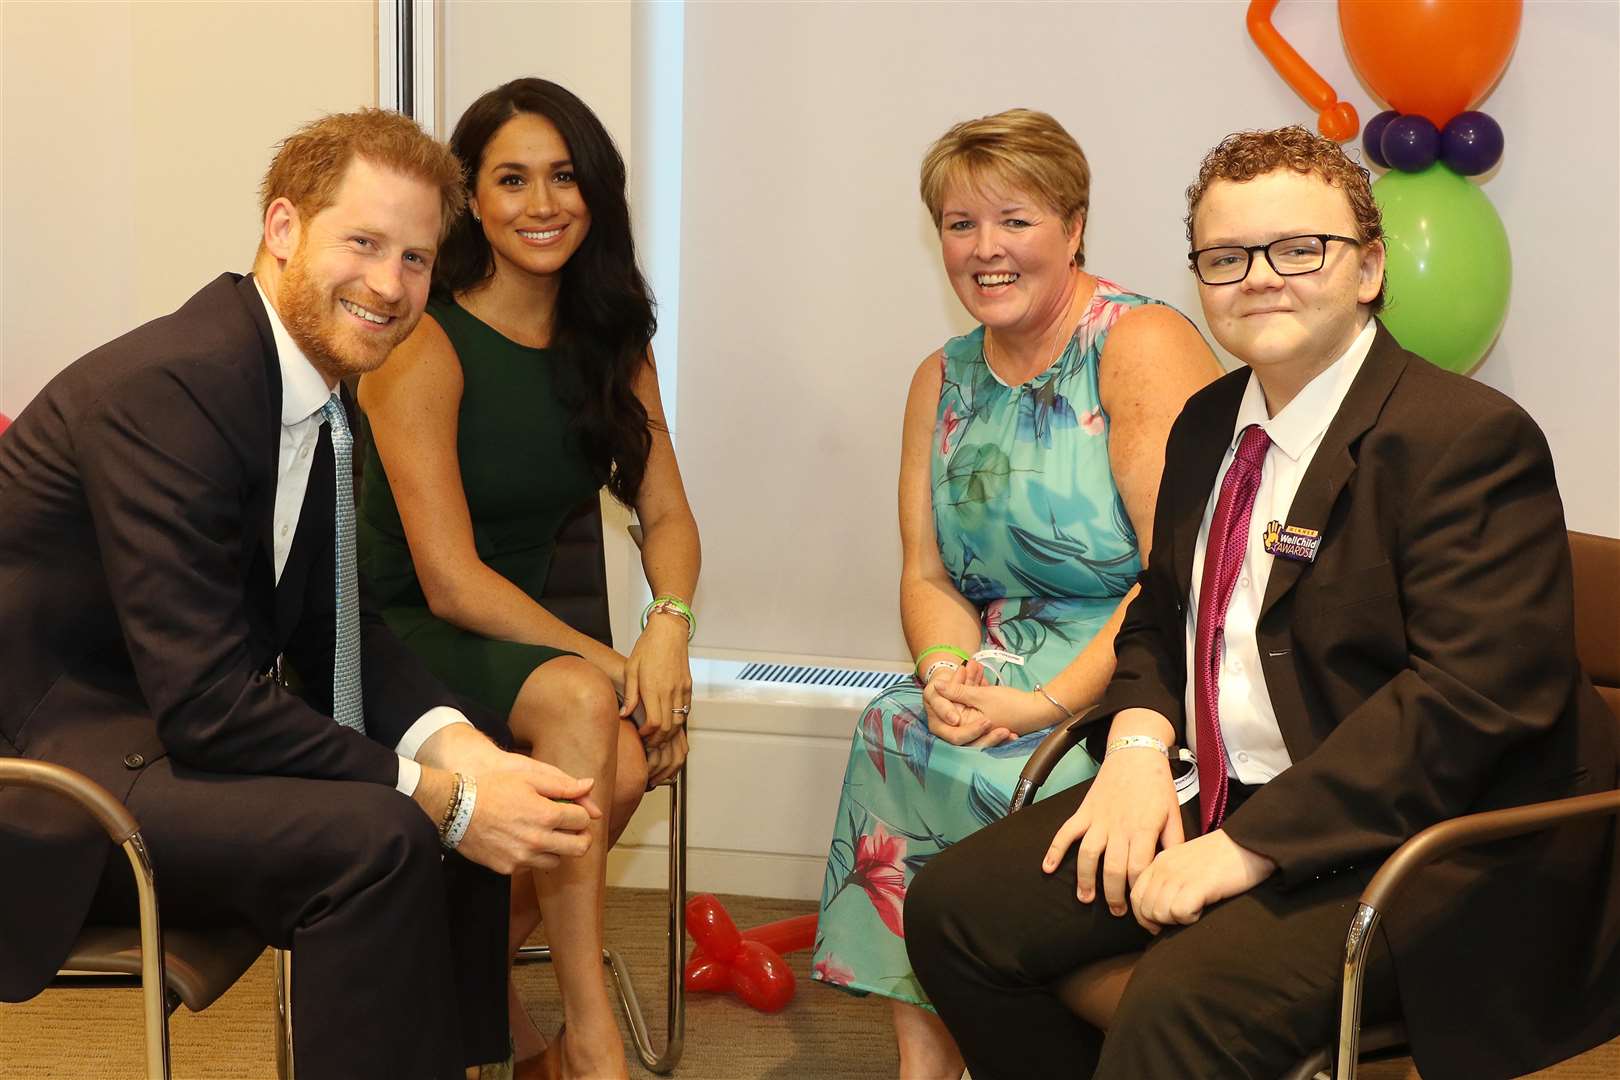 Oakley Orange, from Rochester, with his mum Lorraine chat to the Duke and Duchess of Sussex Prince Harry and Meghan Markleis presented with an award and meets Prince Harry during the WellChild Awards 2019 in London.